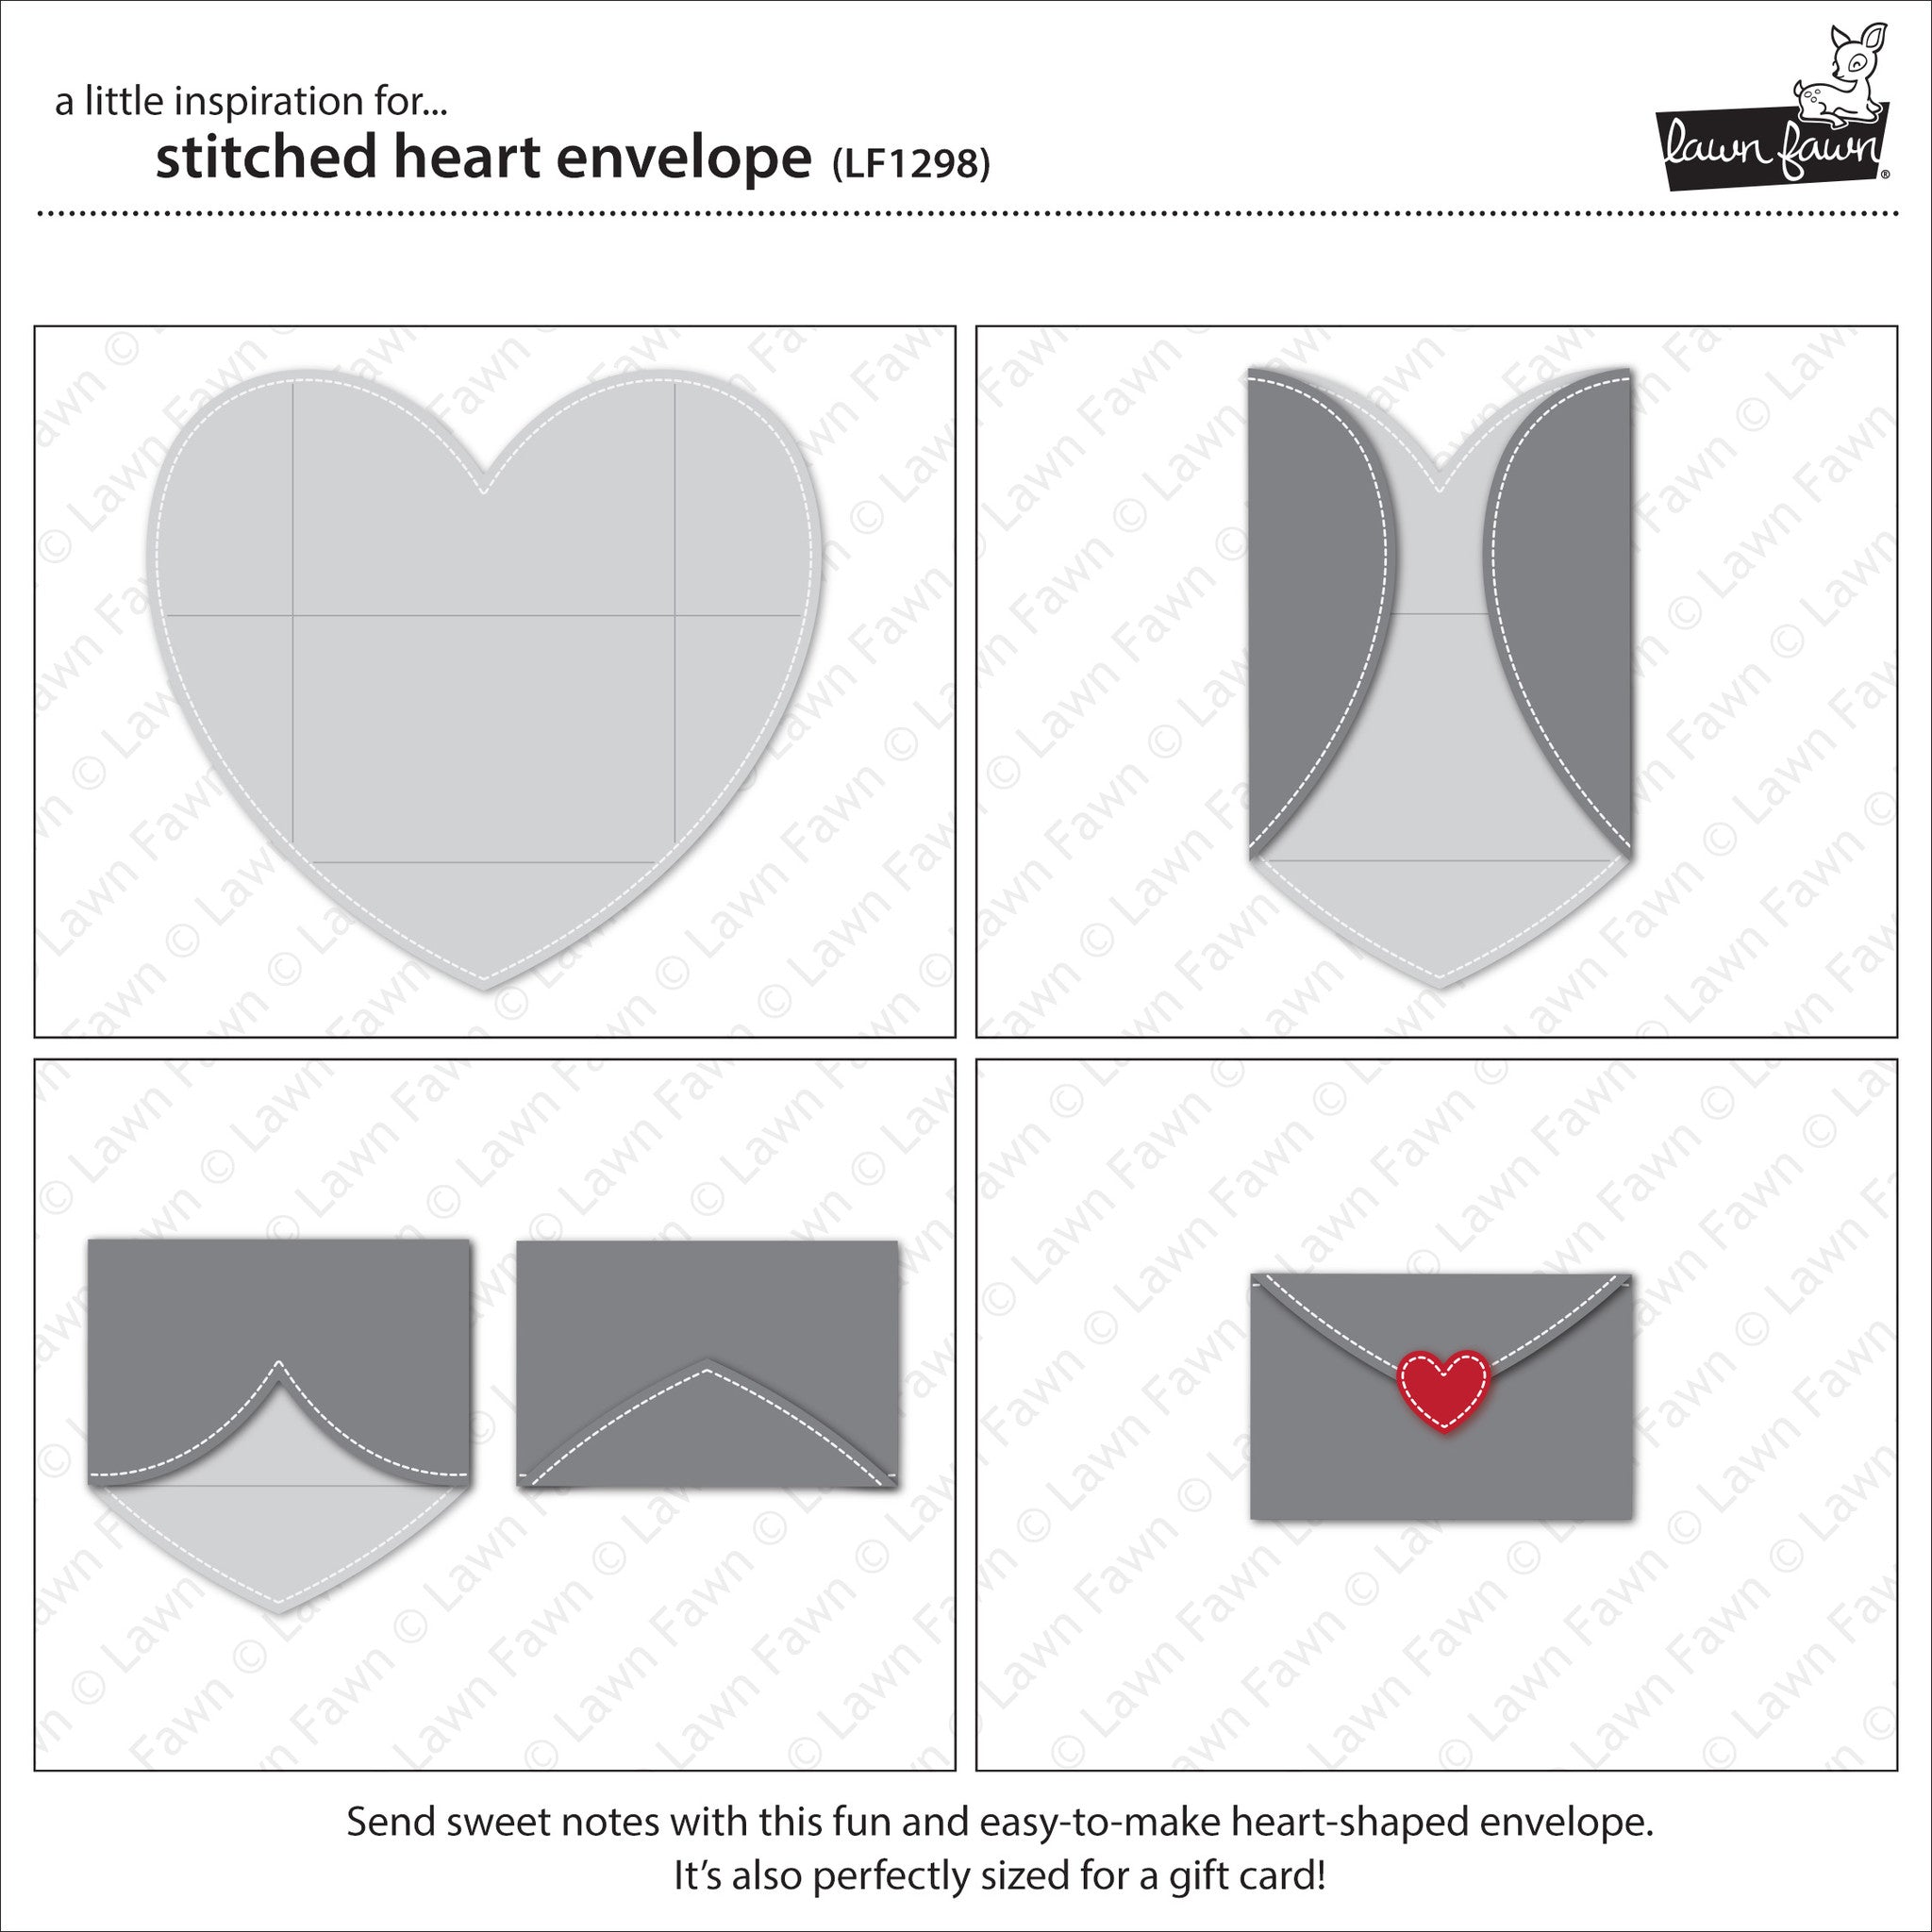 stitched heart envelope